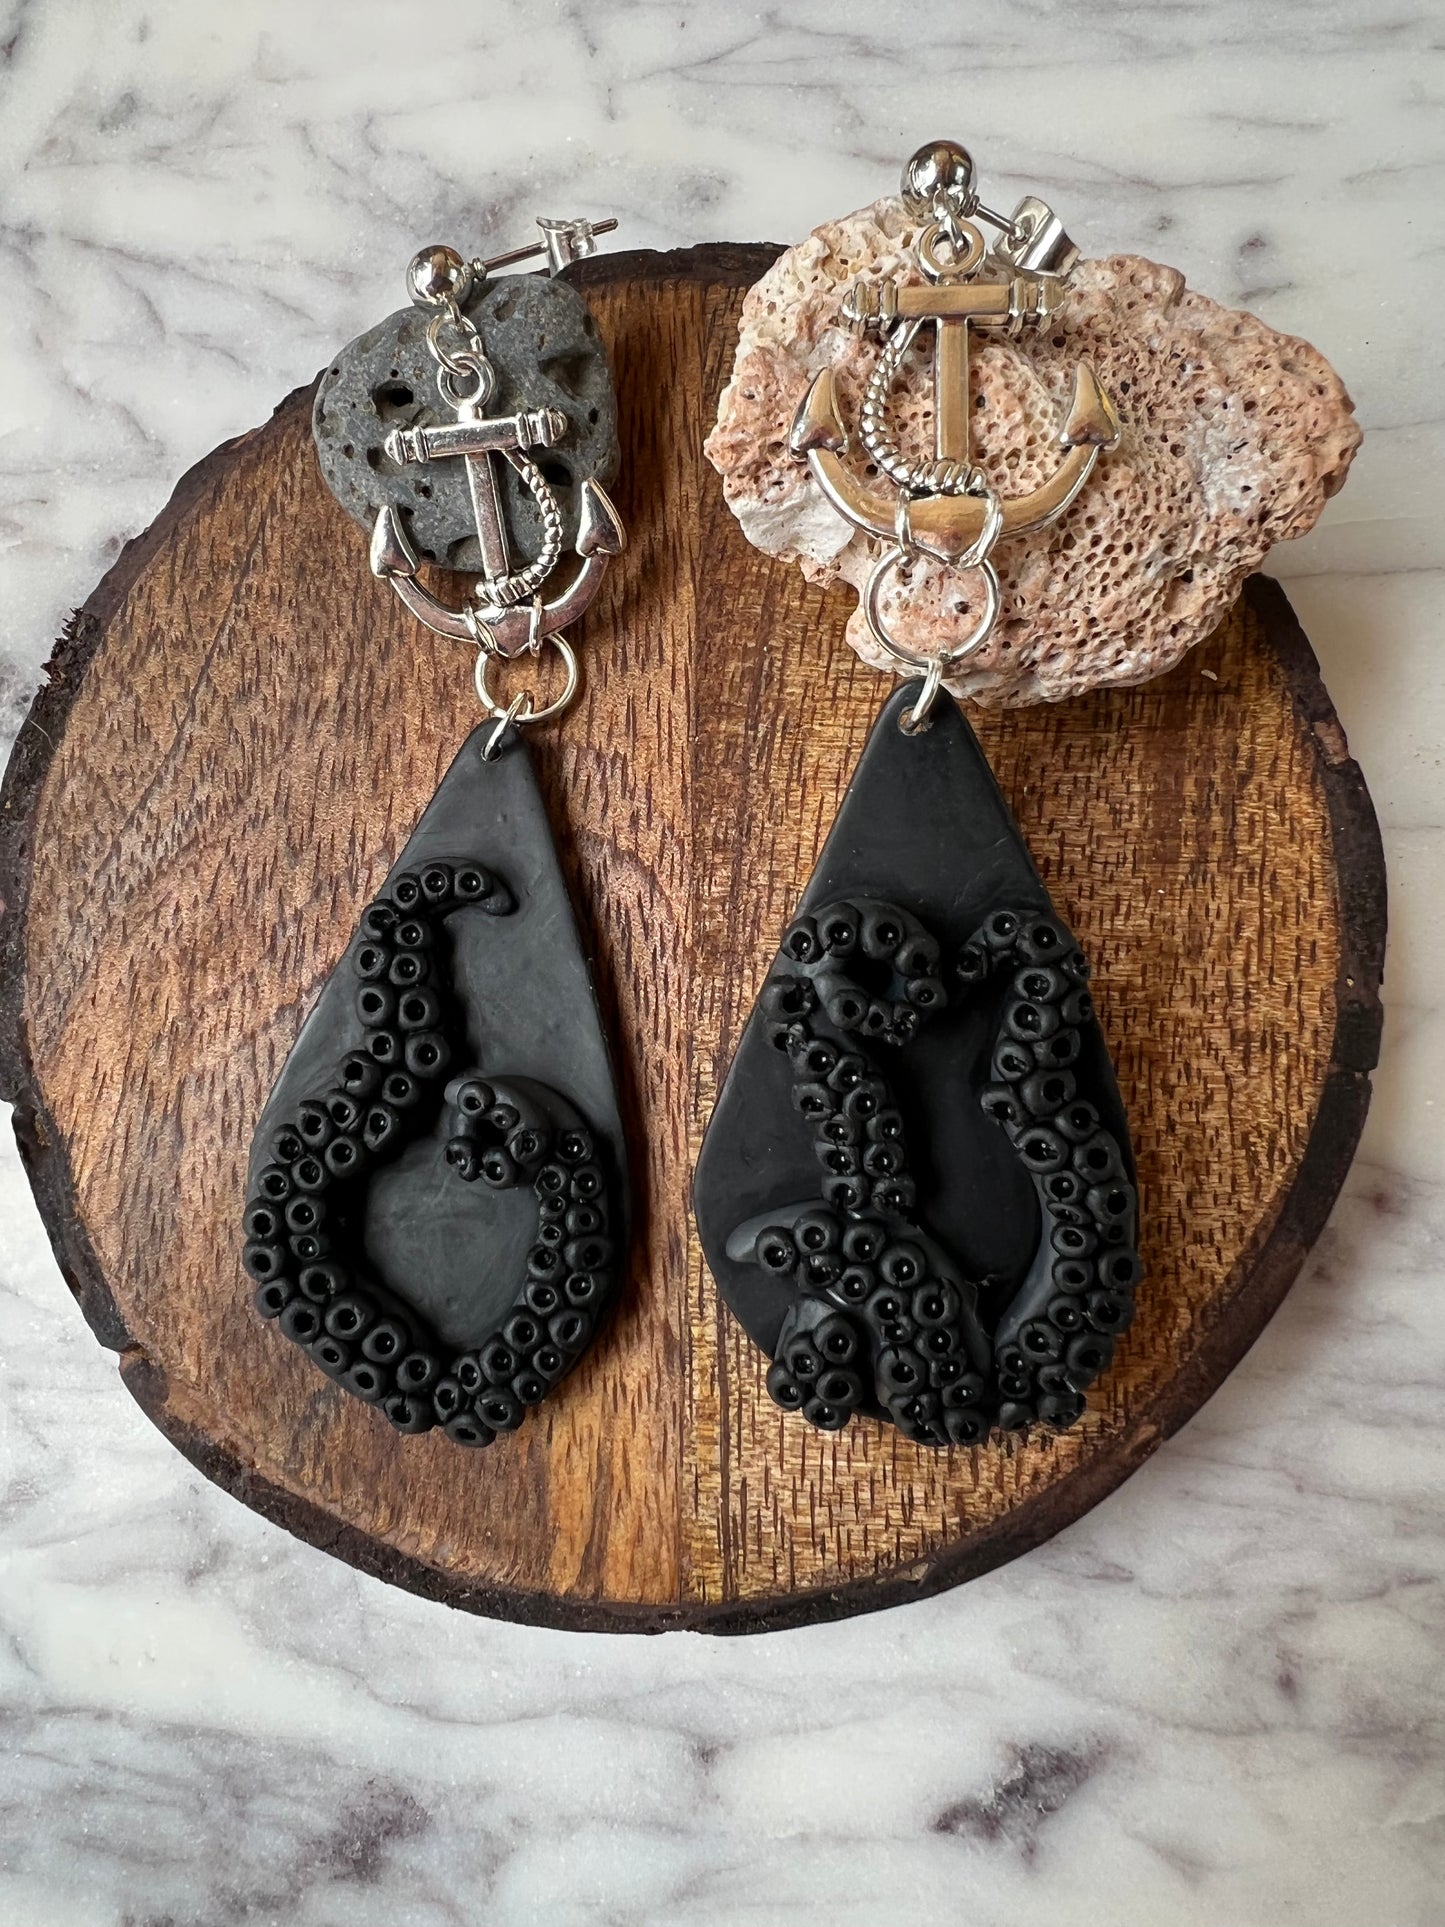 Dive into nautical style with our kraken polymer clay earrings! These intricately crafted accessories capture the mystique of the deep sea, featuring a fearsome kraken design. Add a touch of maritime adventure to your look with these statement earrings.